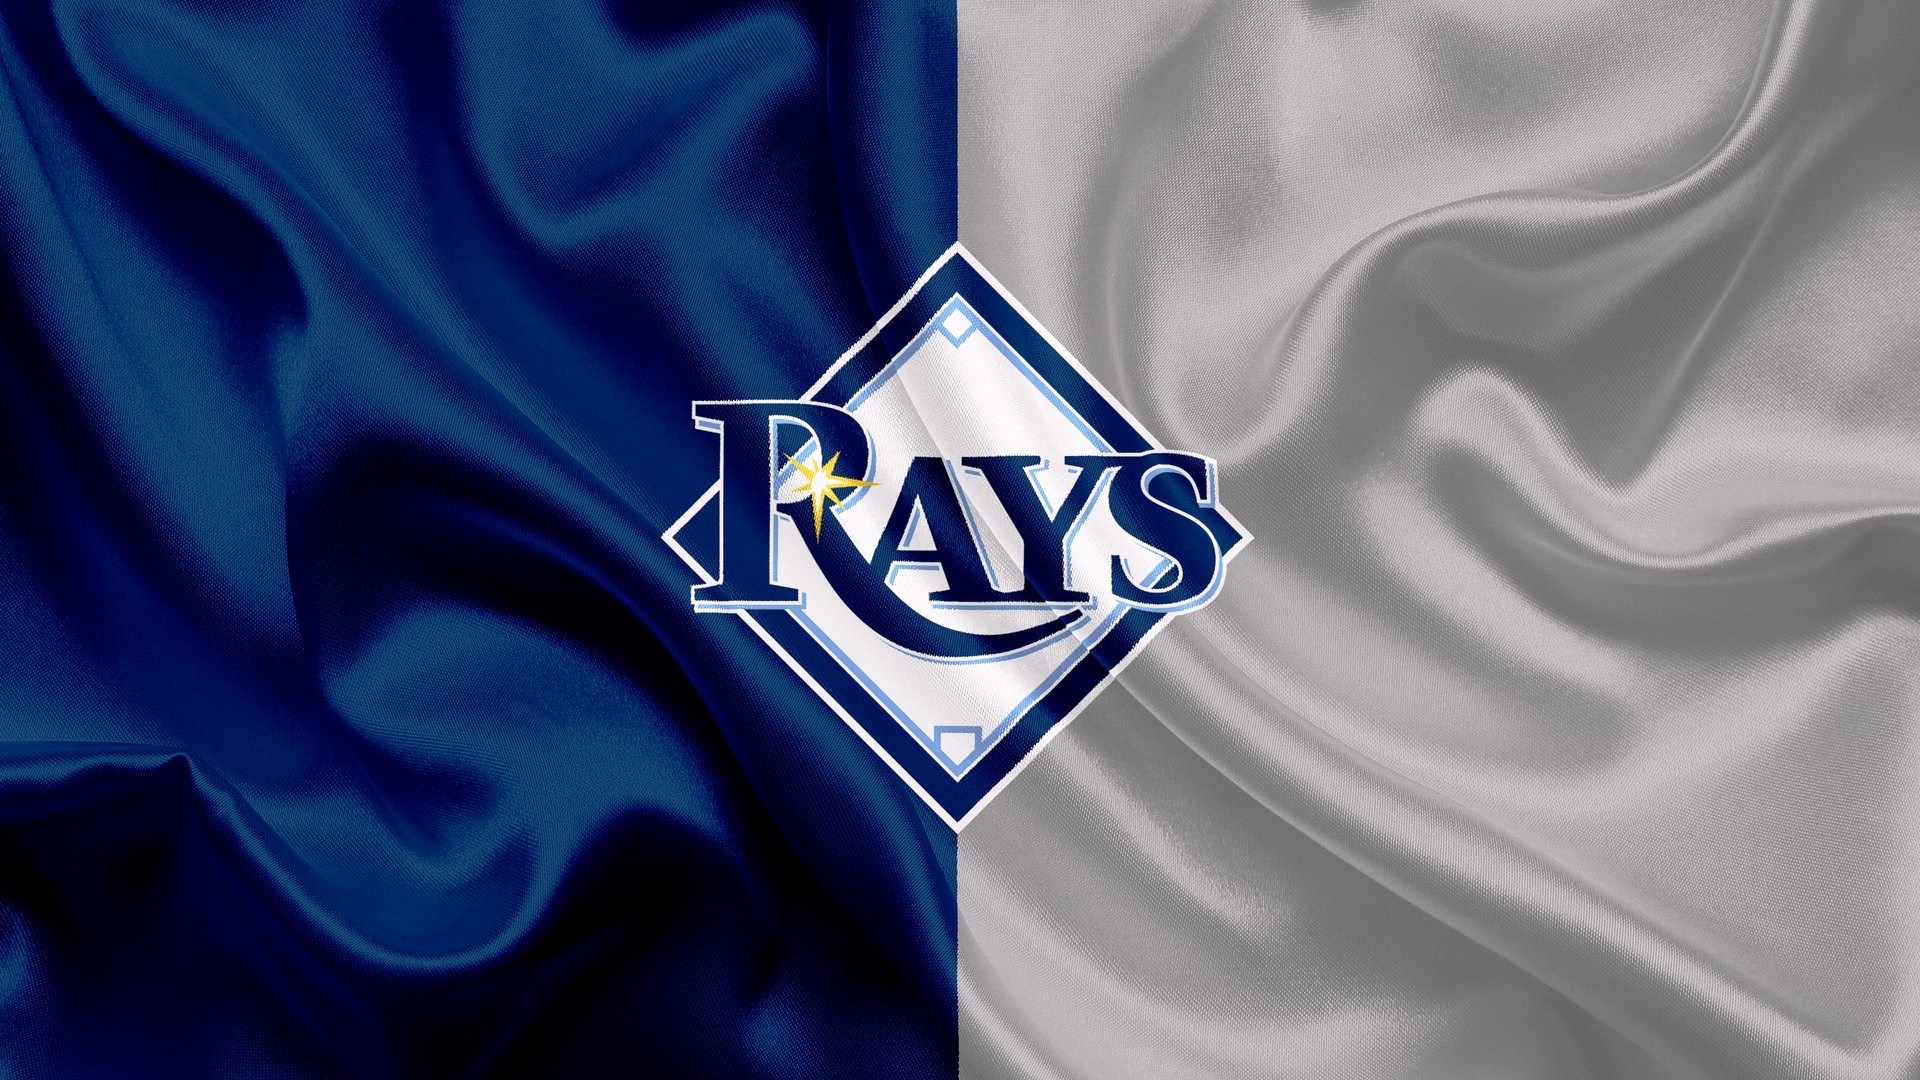 Tampa Bay Rays Laptop Wallpaper With high-resolution 1920X1080 pixel. You can use this wallpaper for Mac Desktop Wallpaper, Laptop Screensavers, Android Wallpapers, Tablet or iPhone Home Screen and another mobile phone device